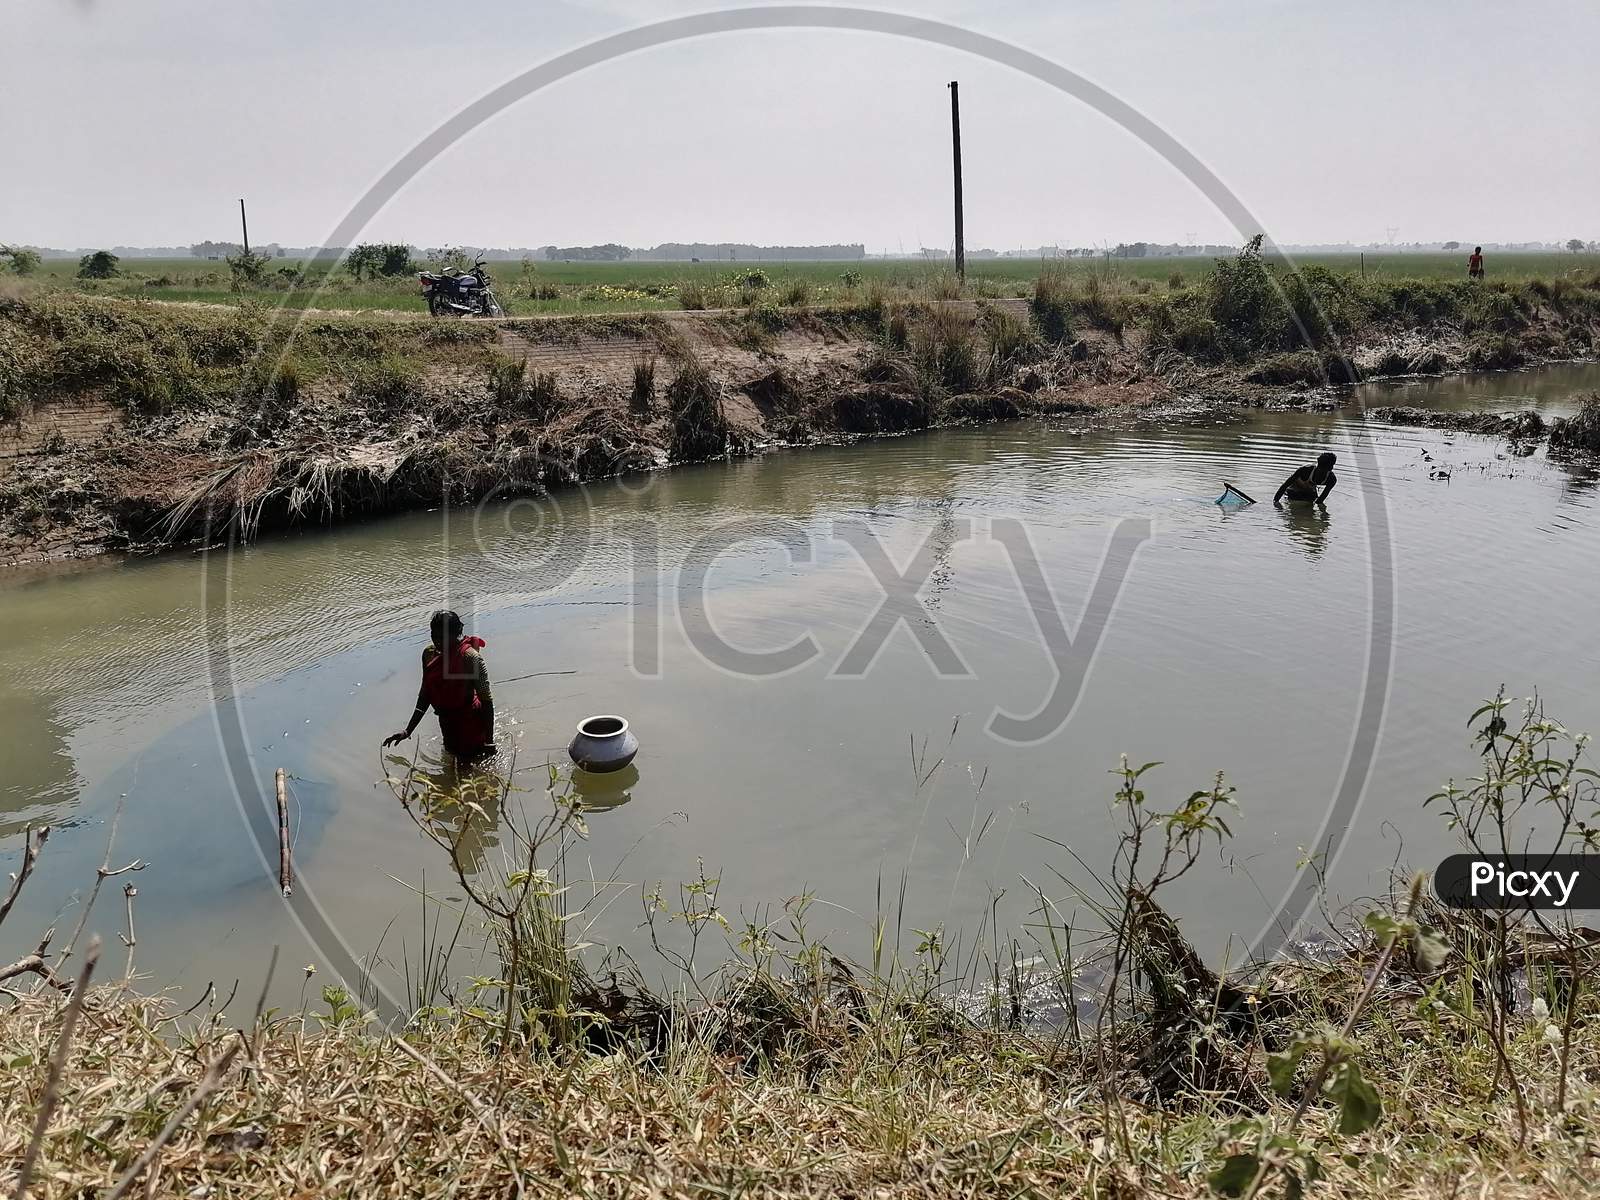 The man is fishing in Drain